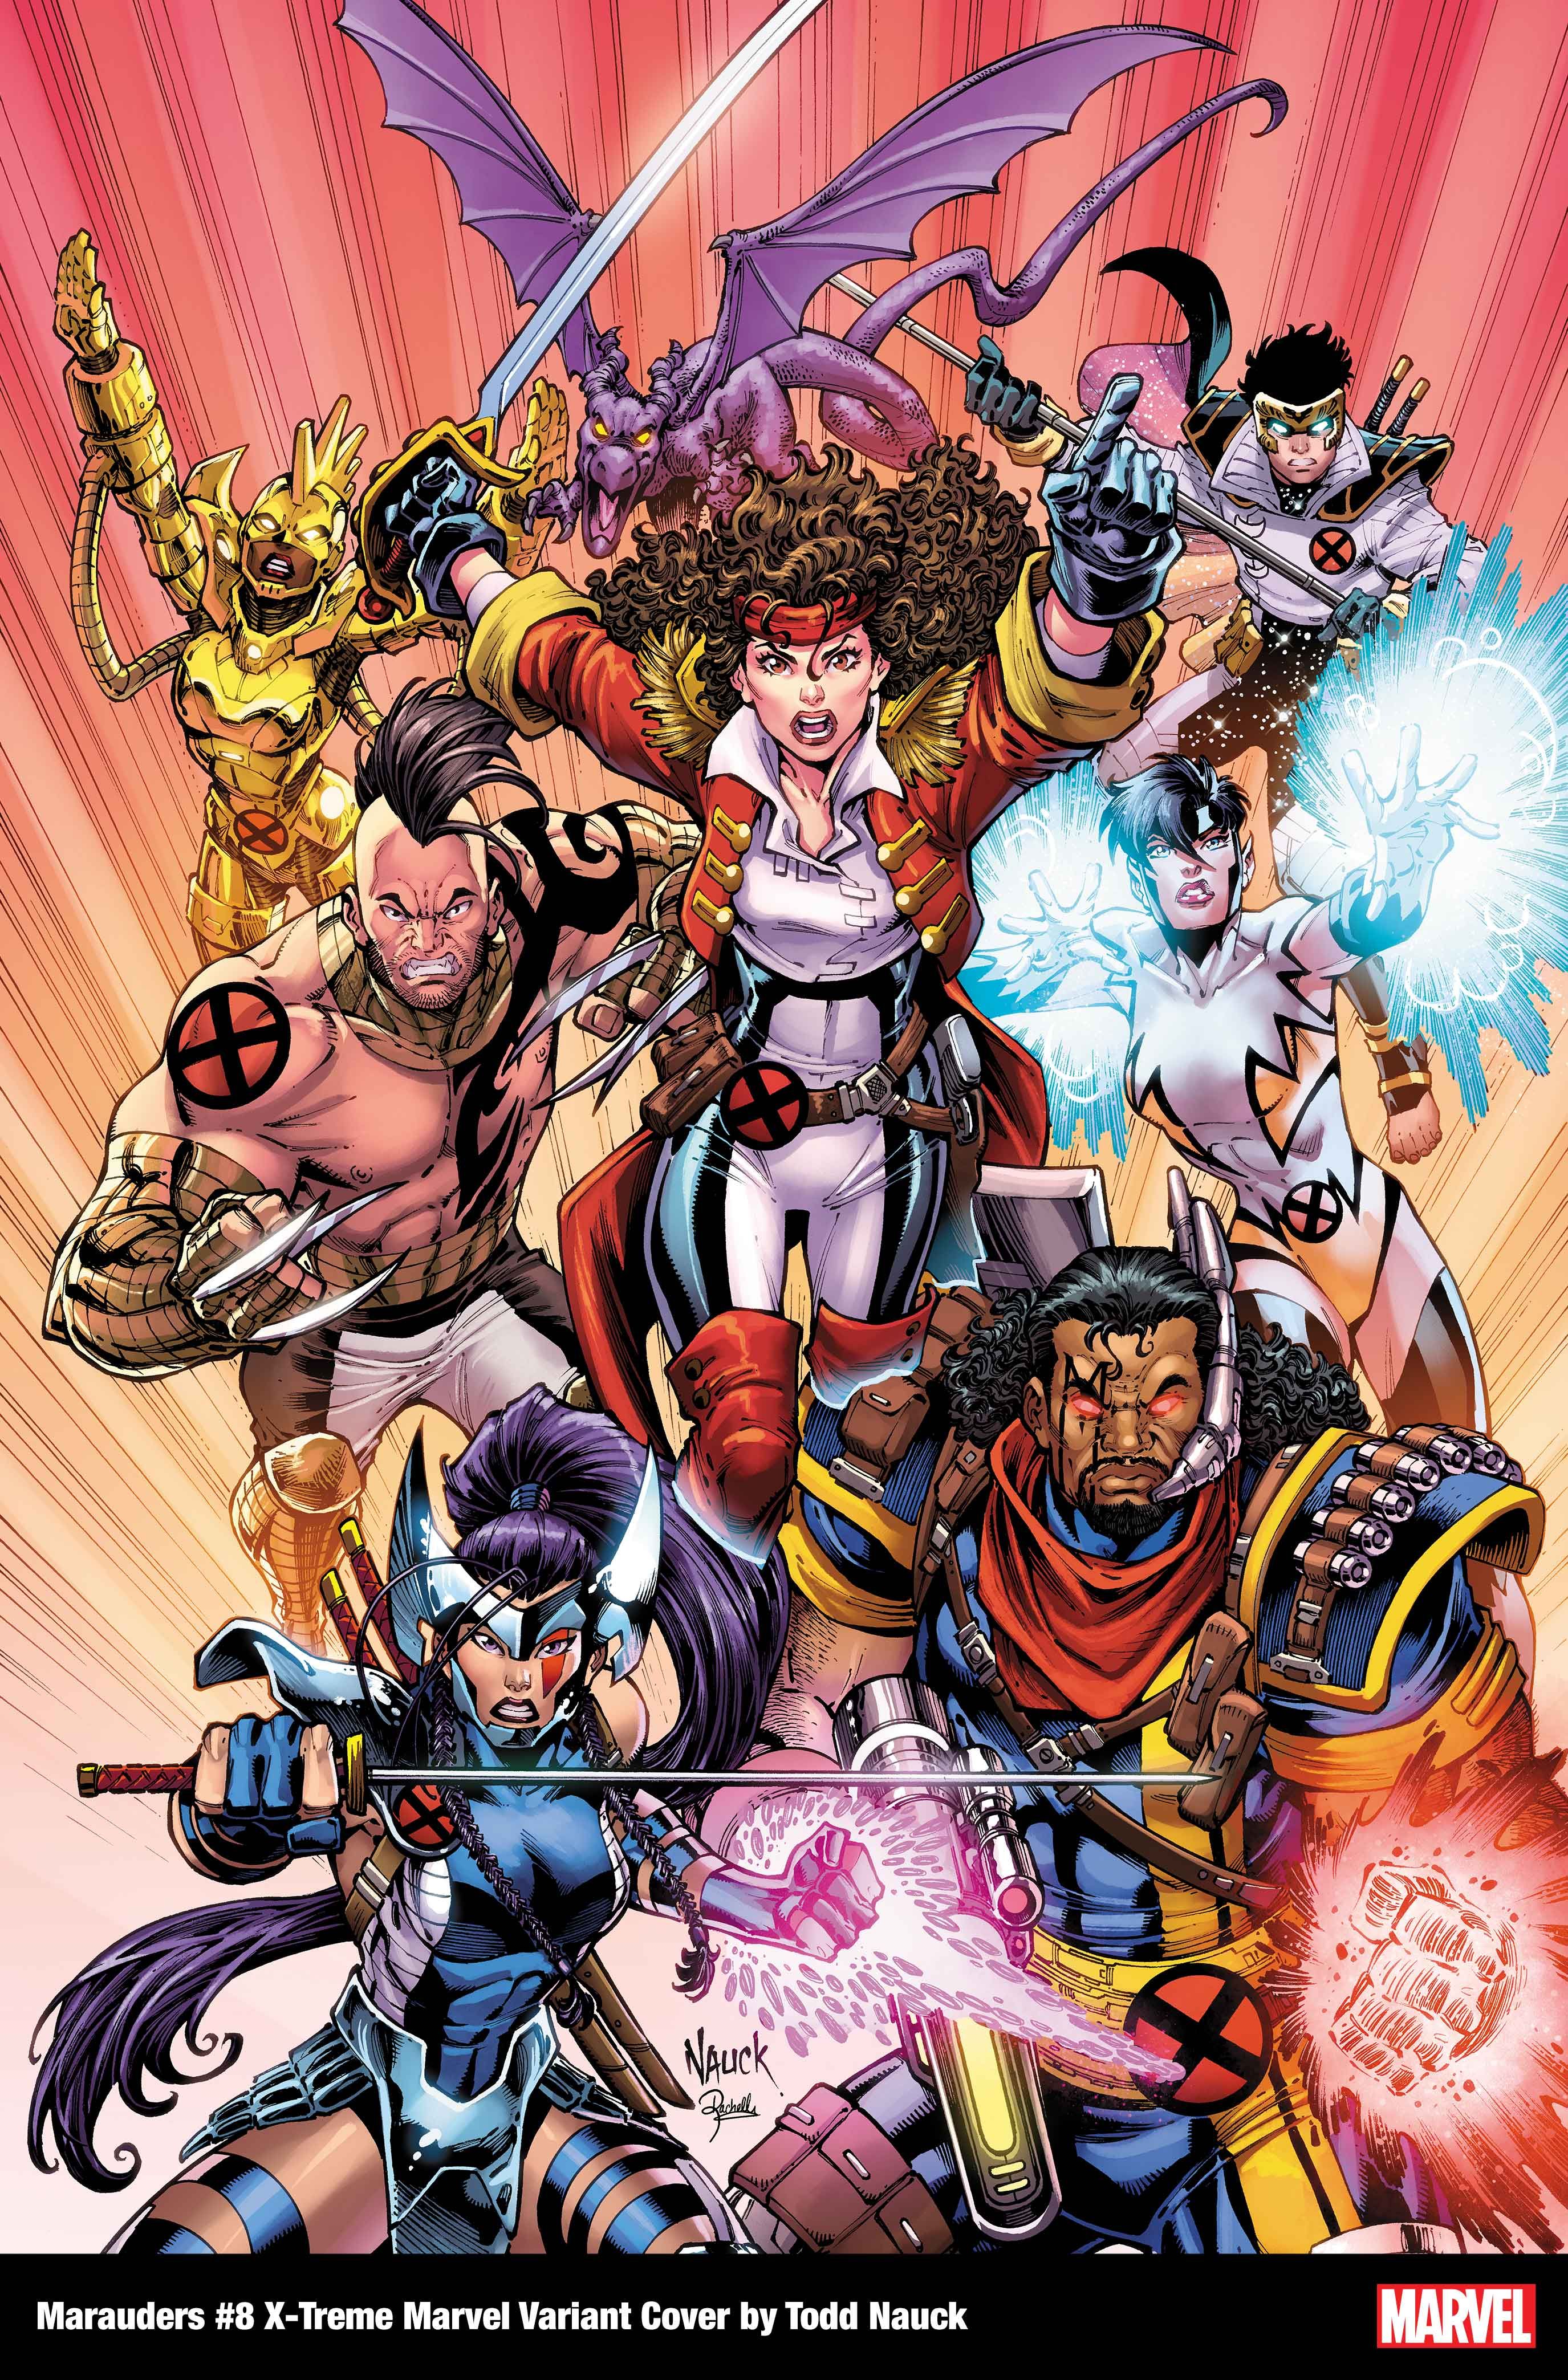 Marvel Goes X-Treme In '90s Throwback Variant Cover Series